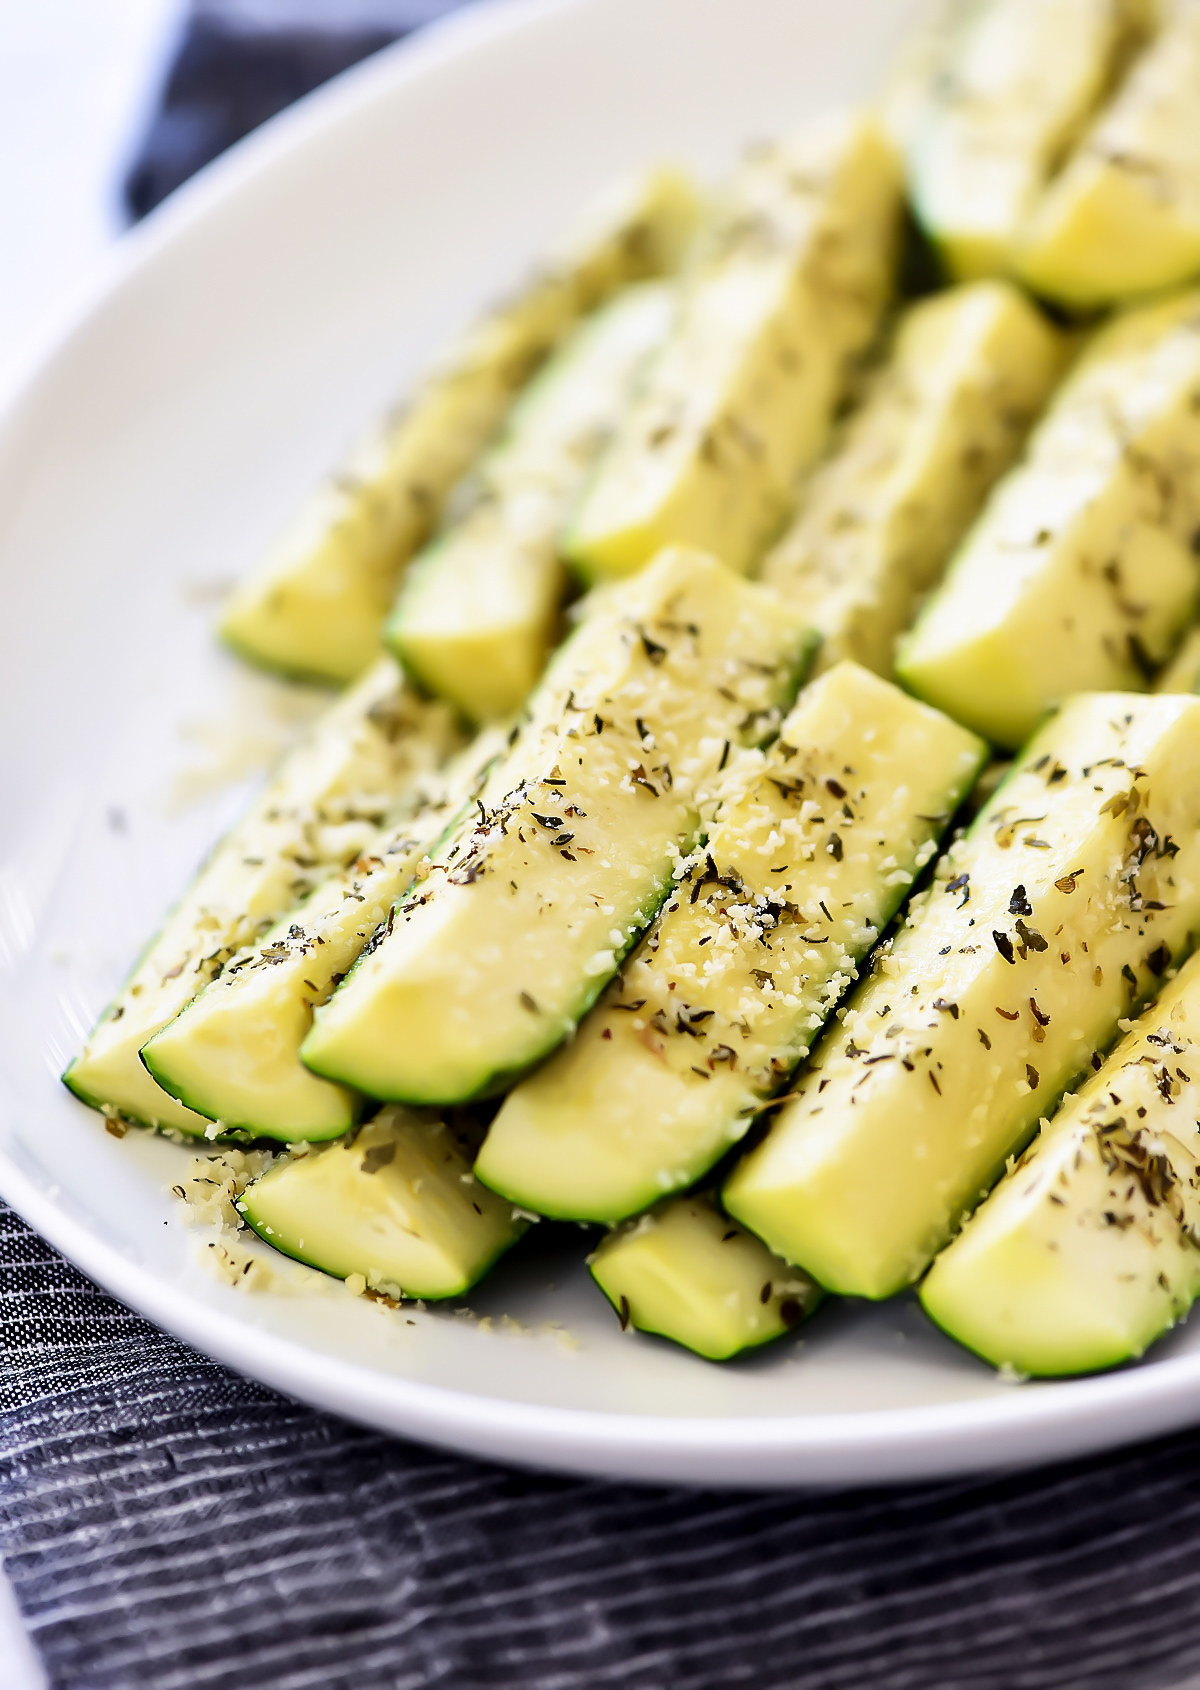 Zucchini slices sprinkled with parmesan cheese